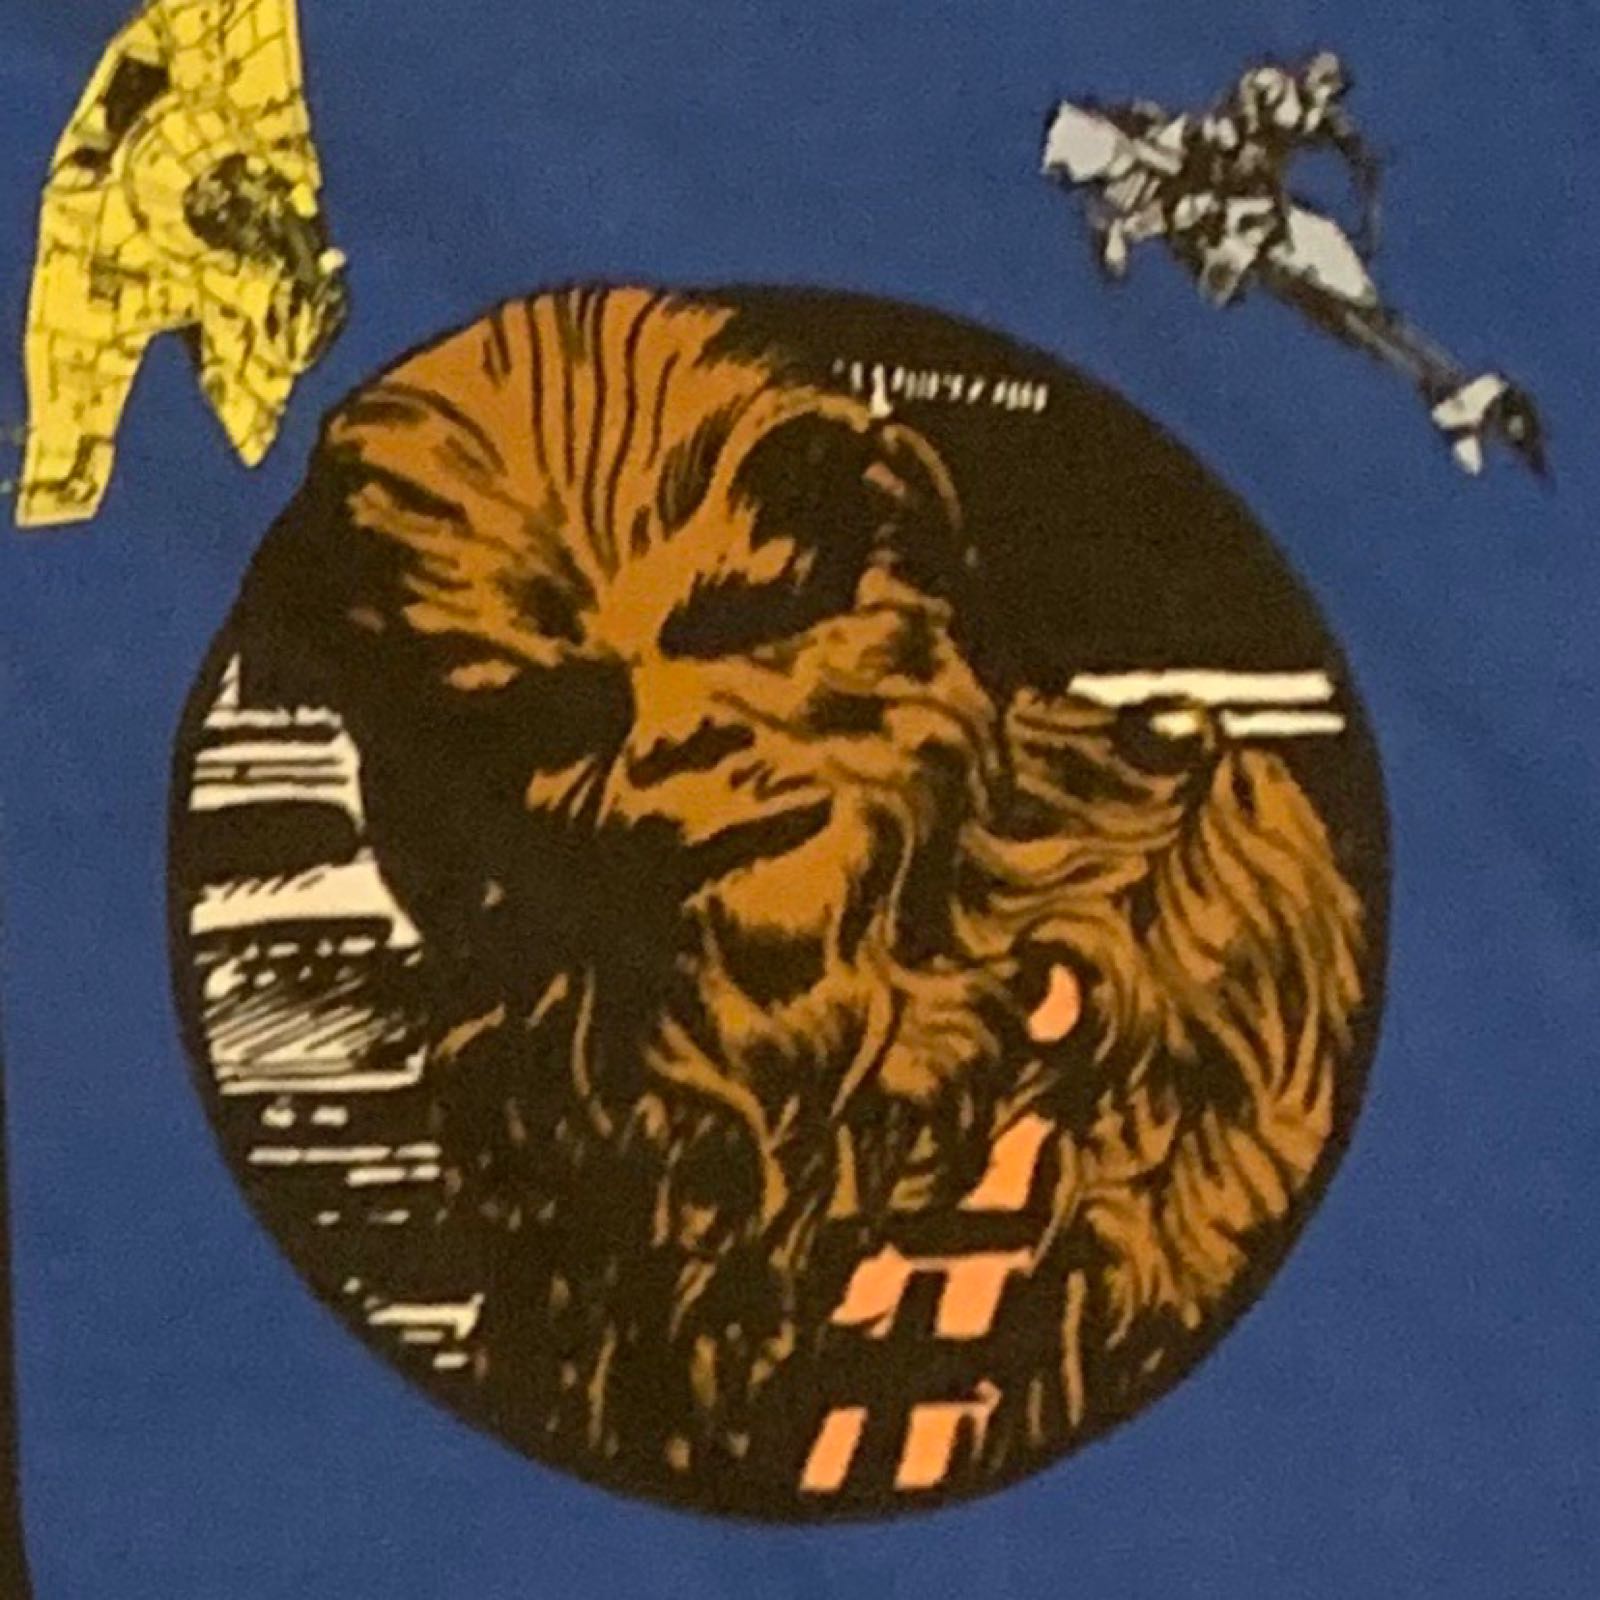 Limited Mask - CHEWIE